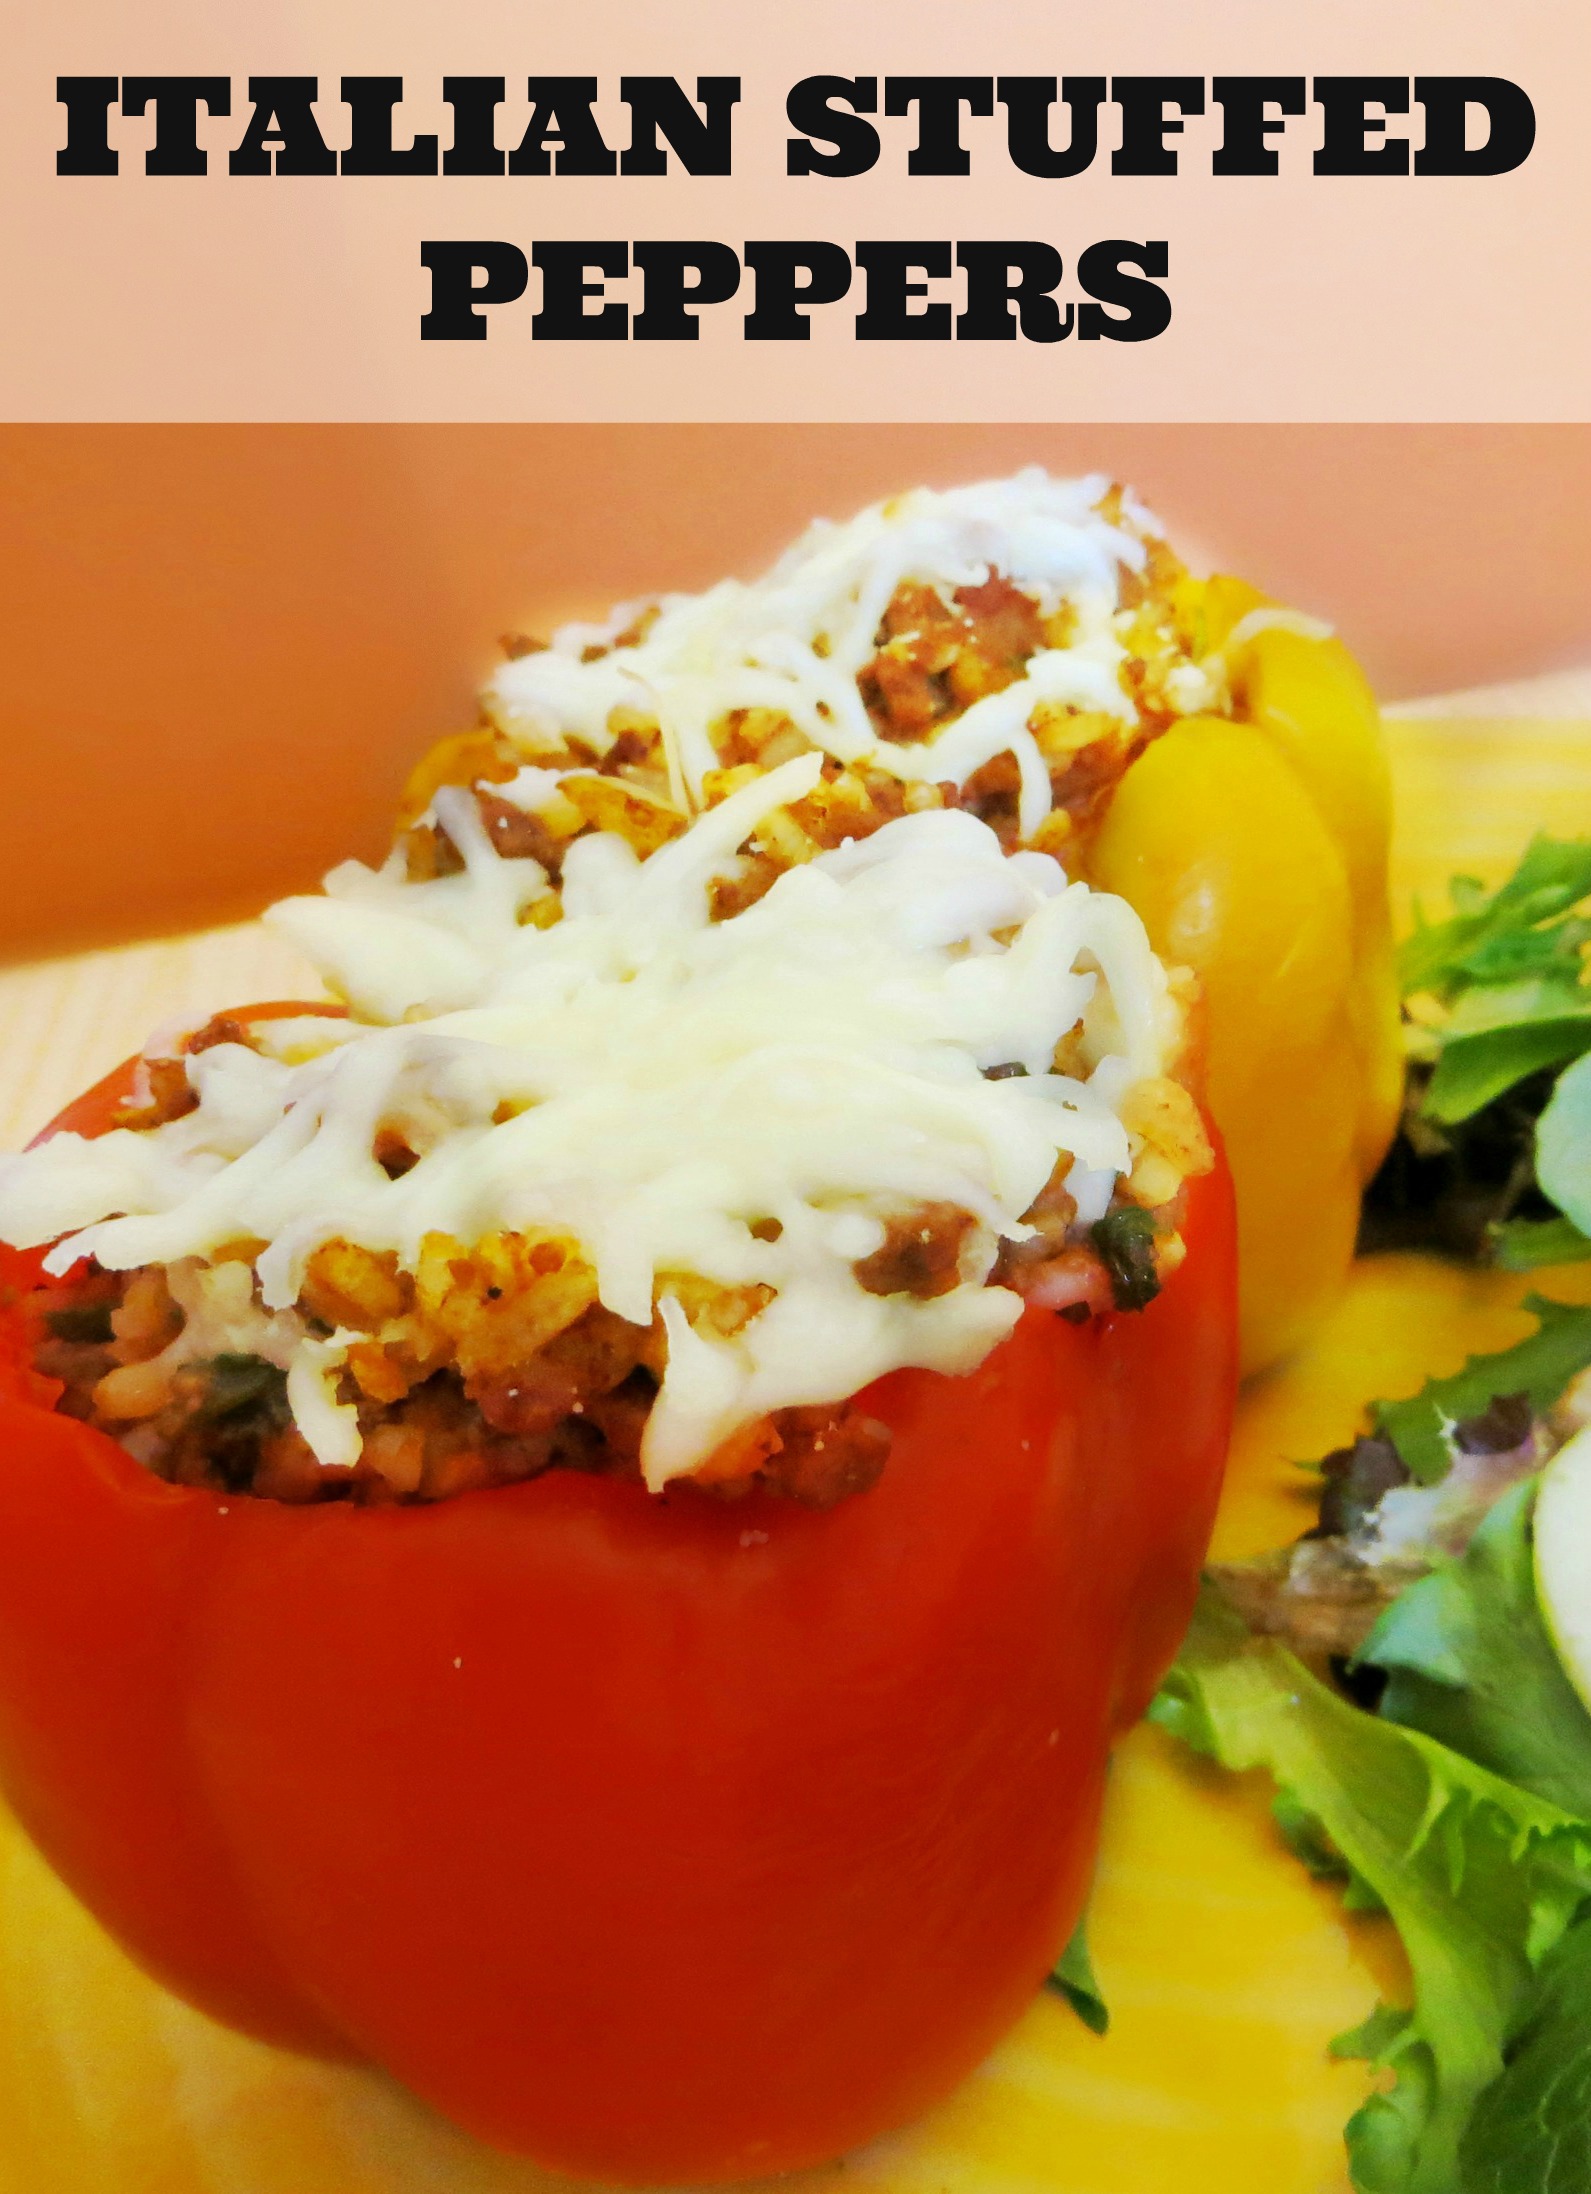 Looking for a great stuffed pepper recipe? This recipe for stuffed peppers has all the healthy ingredients of stuffed peppers with an Italian twist.